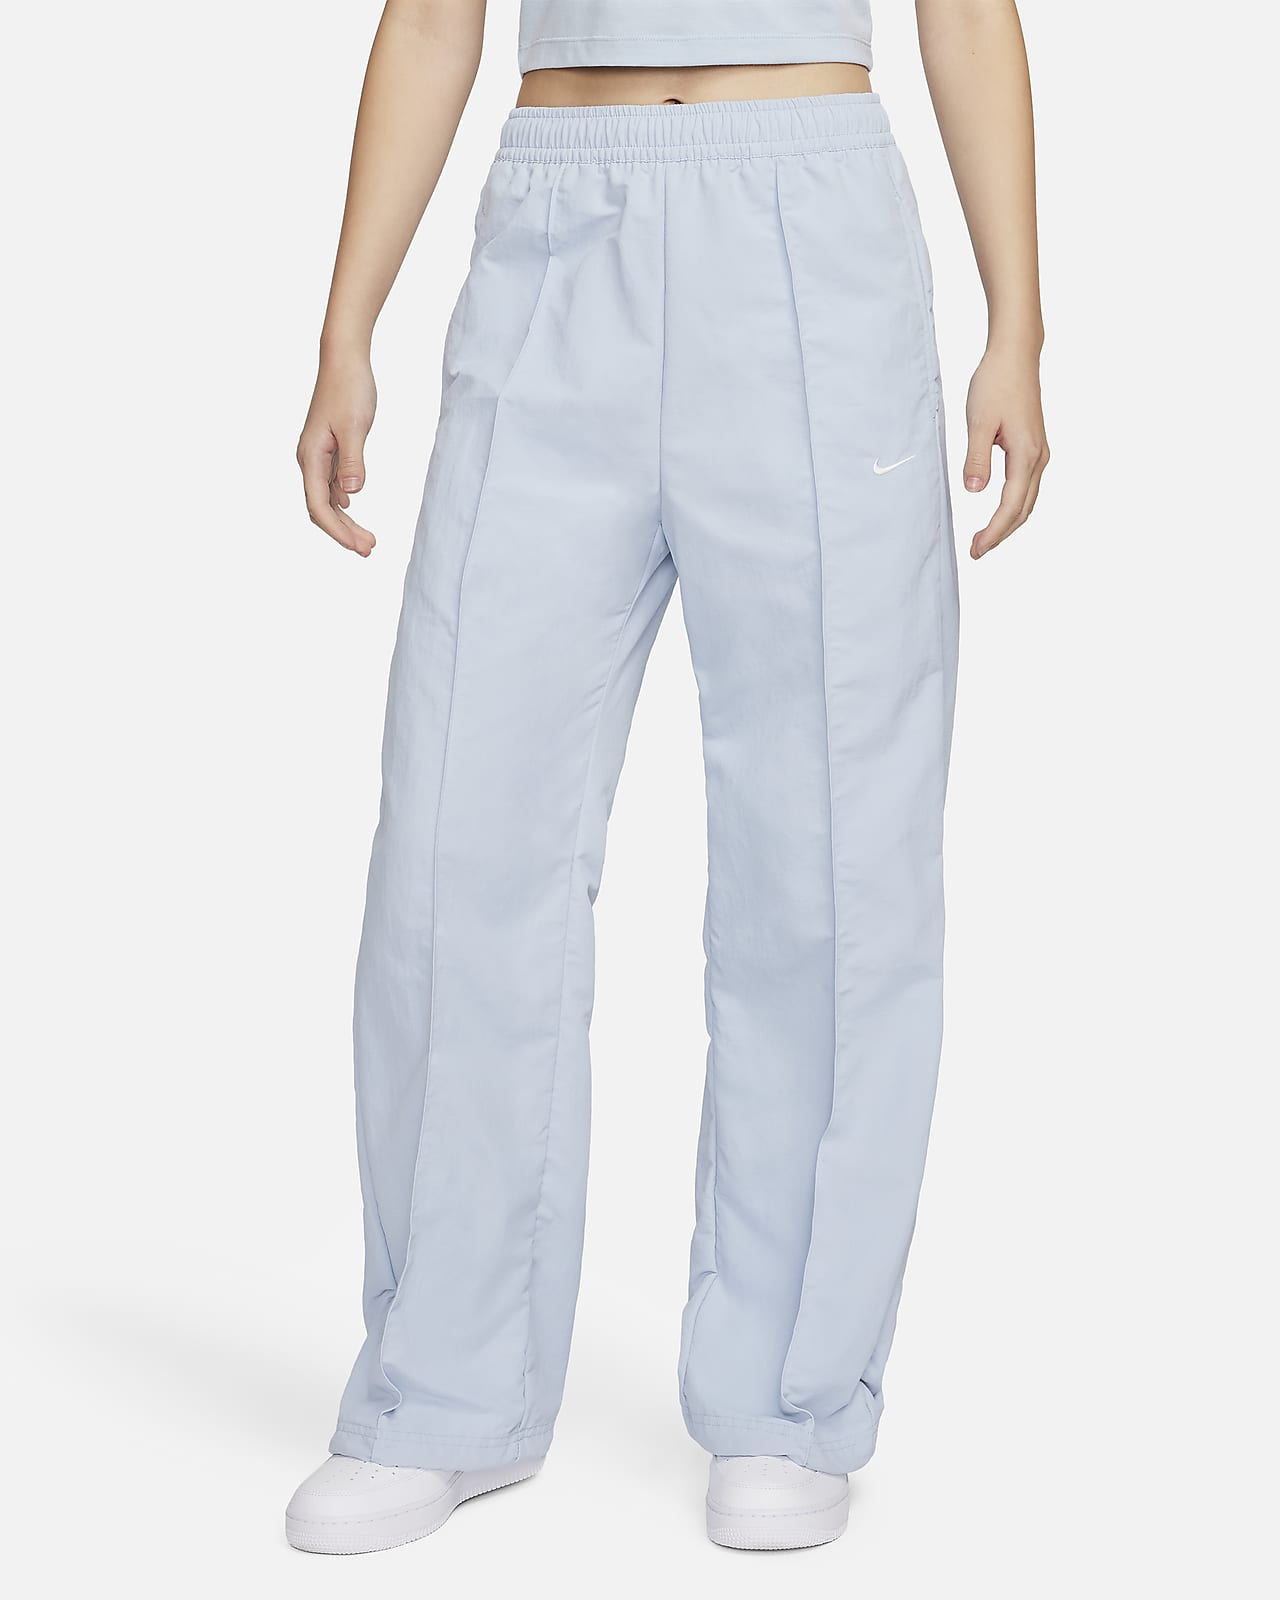 Buy AMERICAN EAGLE Light Blue Solid Cotton Blend Relaxed Fit Women's Pants  | Shoppers Stop